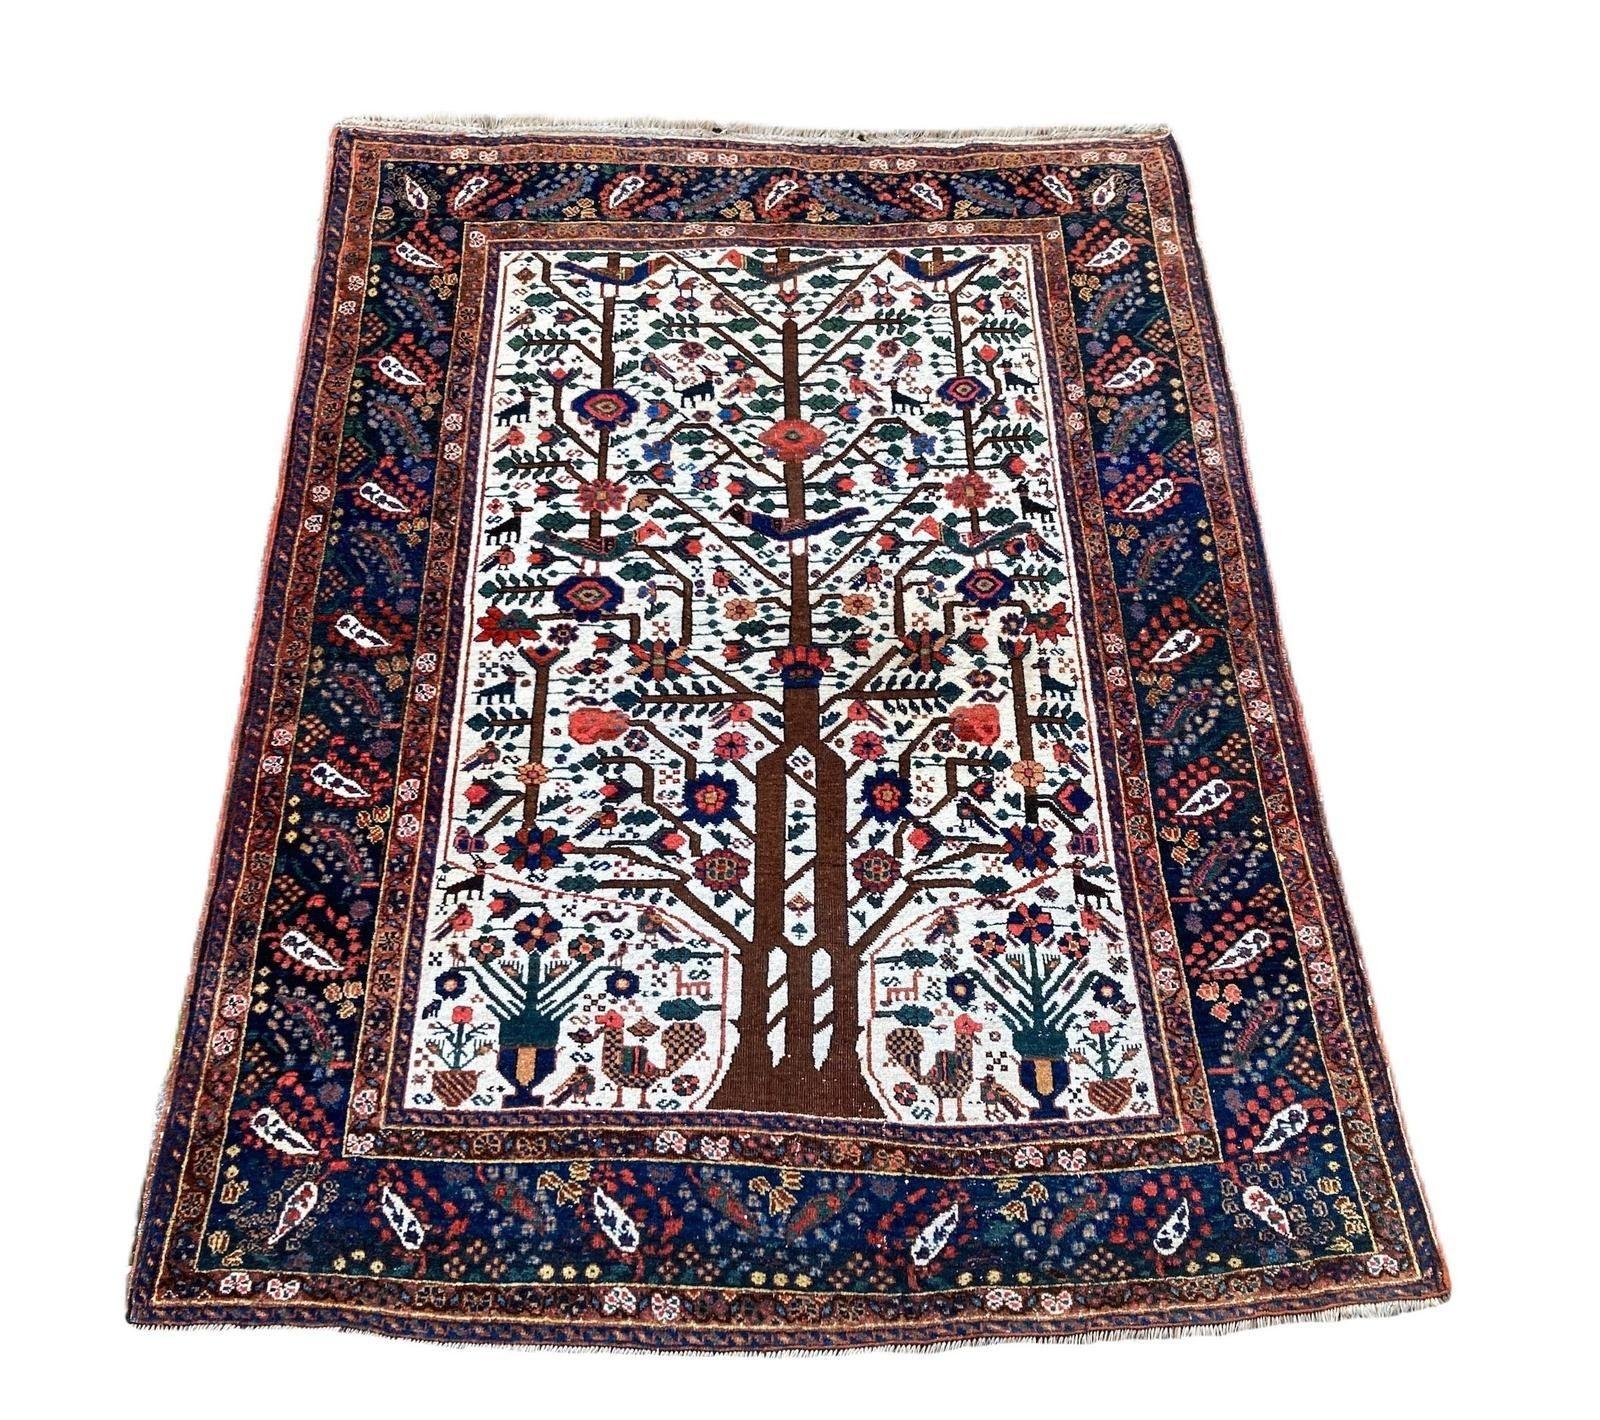 A beautiful antique Neyriz rug, handwoven circa 1910 with a Tree of Life design interspersed with stylised birds and animals on an ivory field and indigo border. Fabulous secondary colours and a great example of tribal weaving.
Size: 2.02m x 1.54m